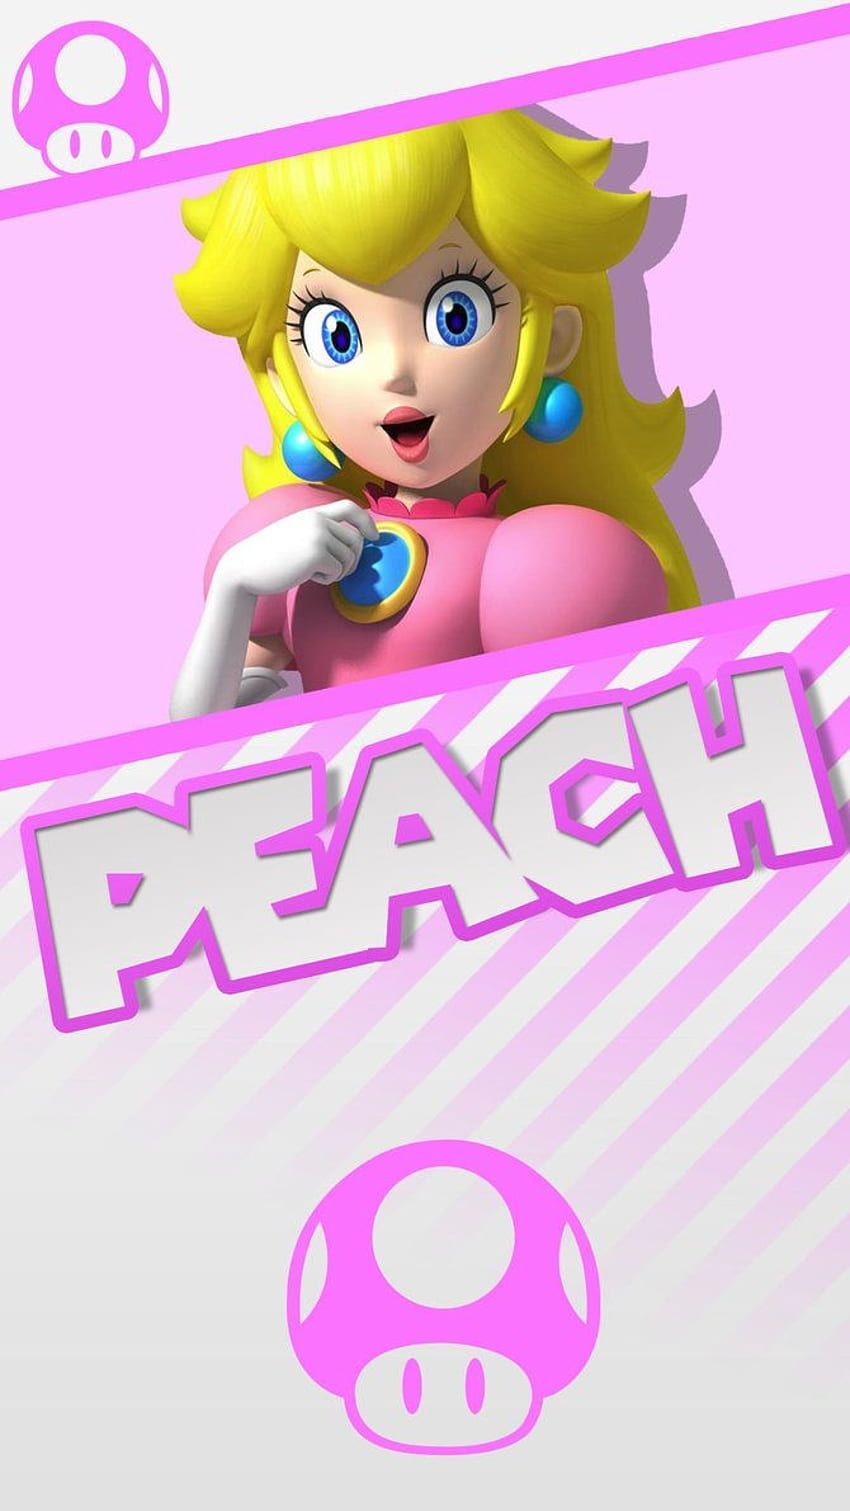 Peach wallpaper for mobile devices! By<ref> Princess Peach</ref><box>(198,73),(846,445)</box> - Super Mario, Princess Peach